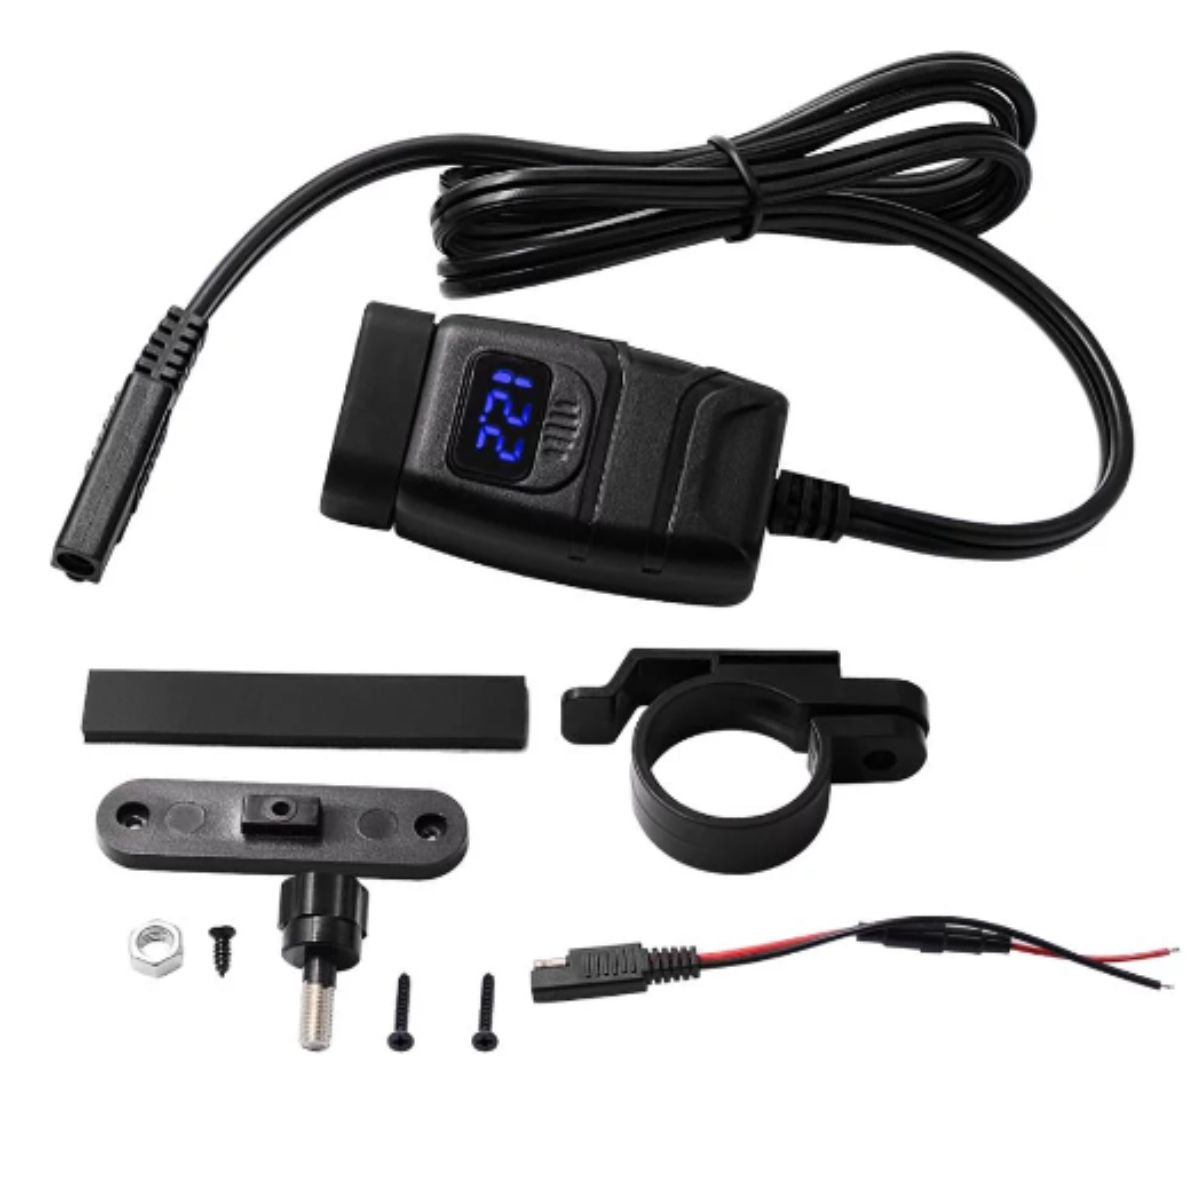 Waterproof Handlebar with QC3.0 Fast Motorbike USB Charger for Mobile Phones 7